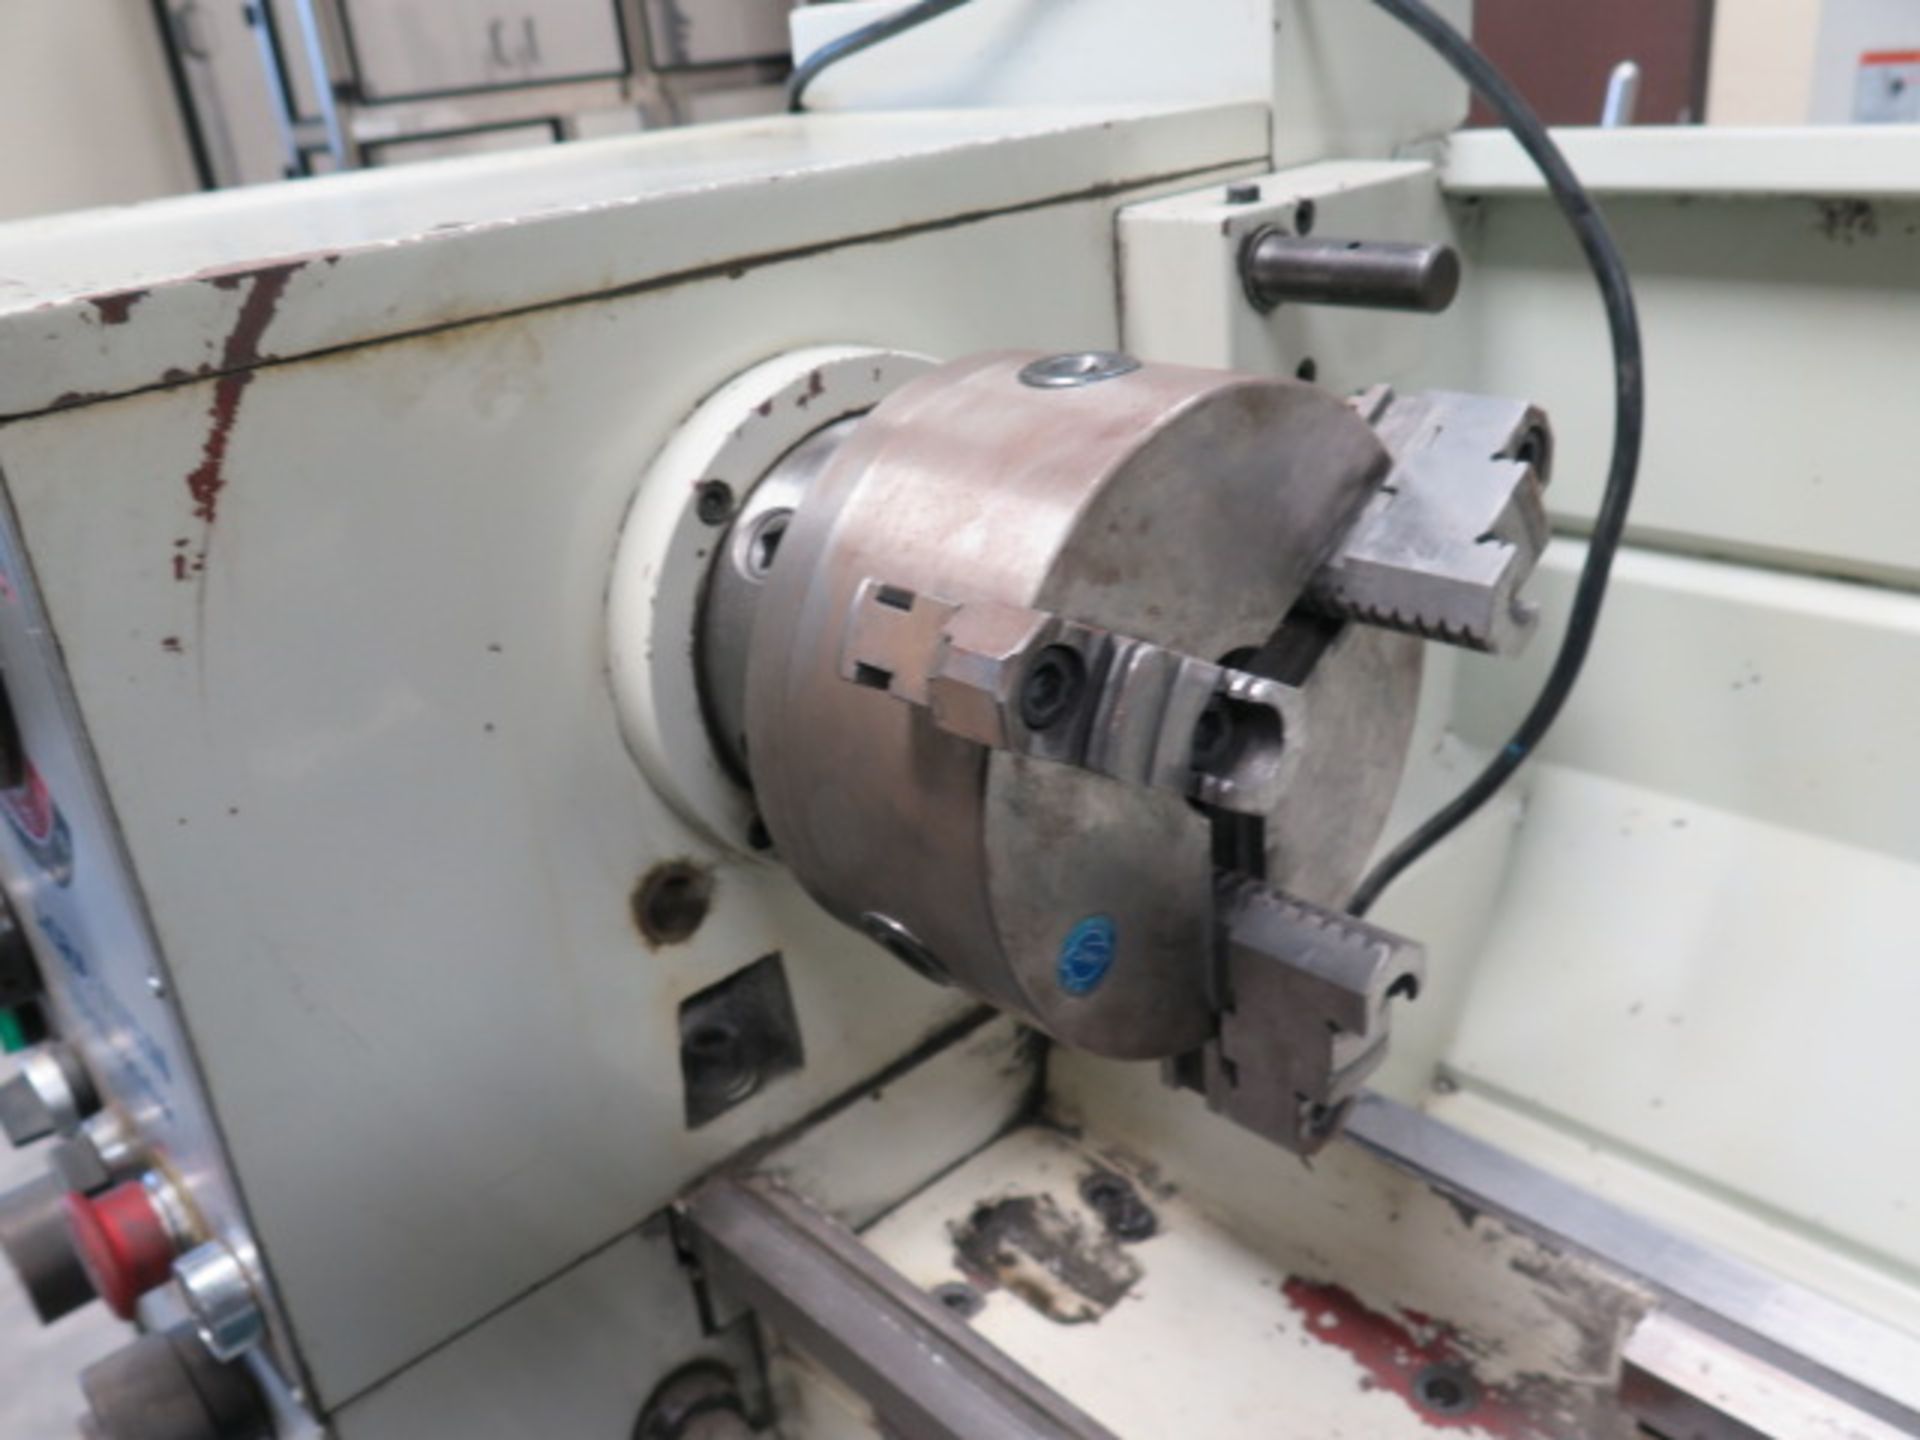 Acra Turn FI-1340 GSM 13" x 40" Geared Gap Bed Lathe w/ 70-2000 RPM, Inch/mm Threading, SOLD AS IS - Image 5 of 8